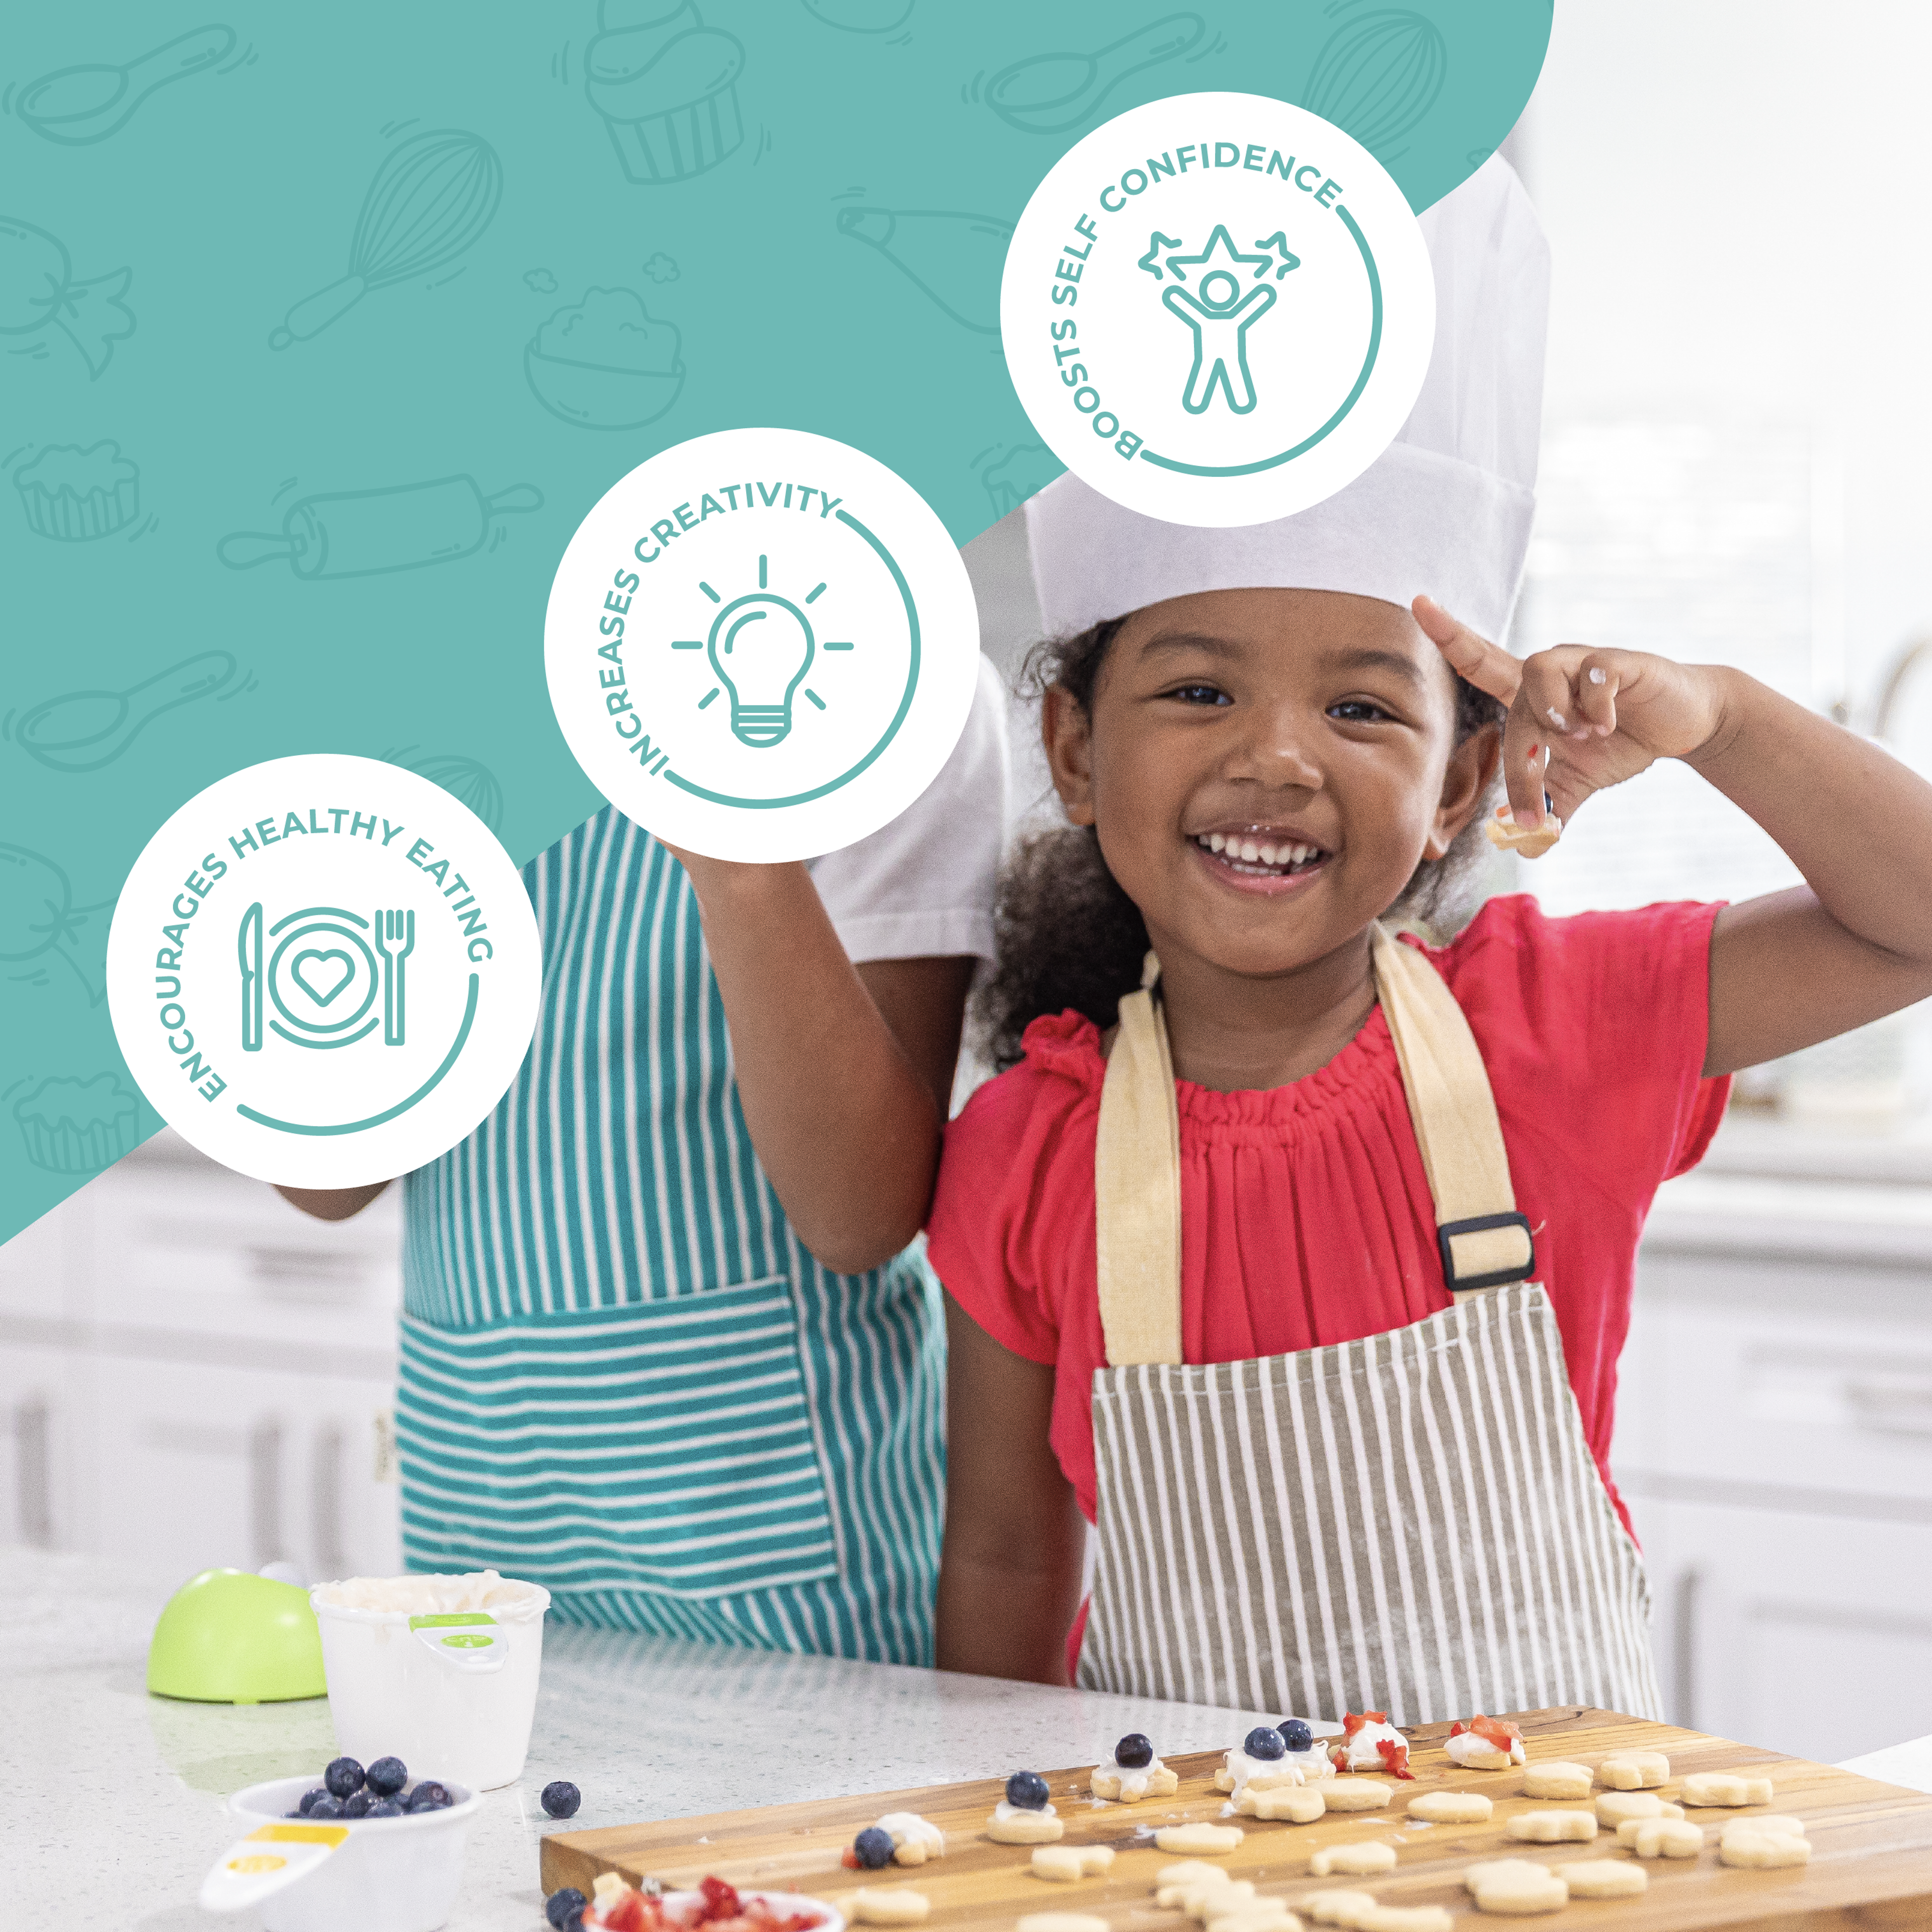 Tovla Jr. Complete Cooking and Baking Set for Kids